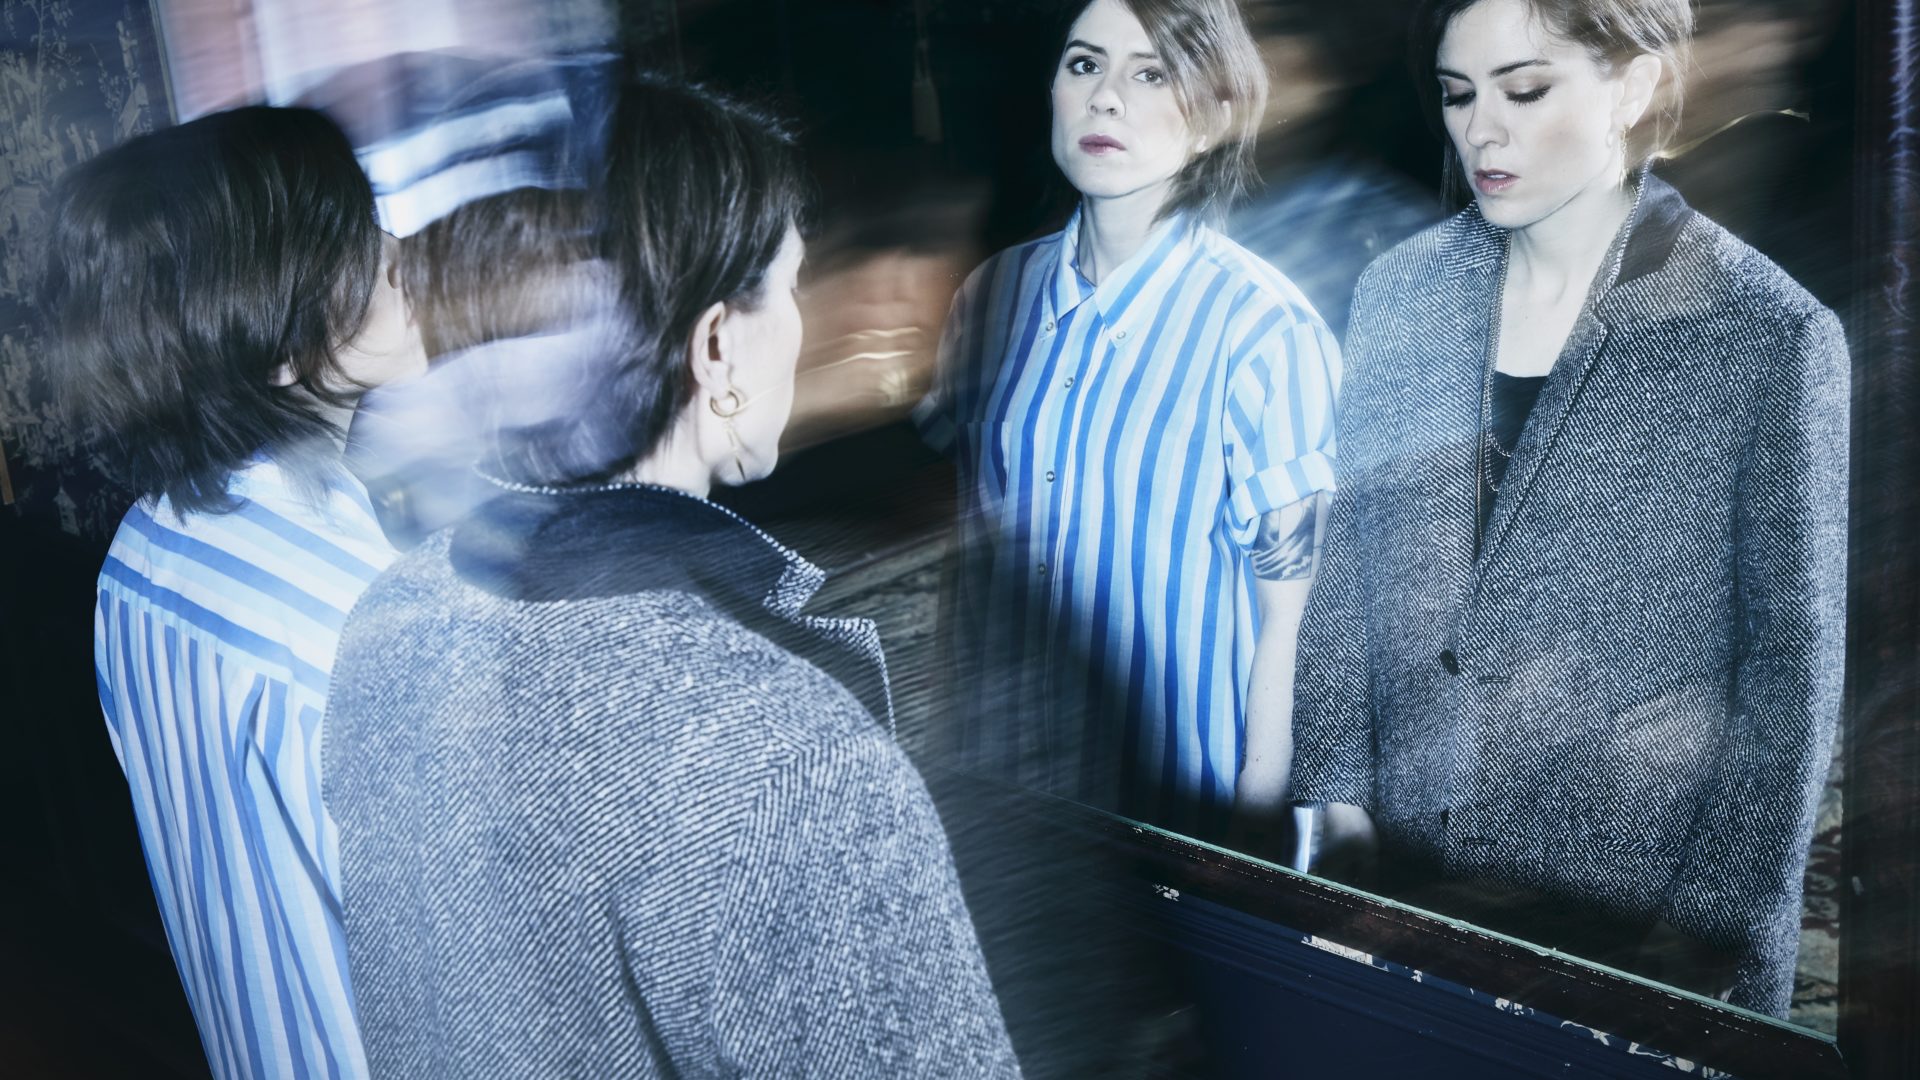 FLOOD - Then Is Now: The Return of Tegan and Sara